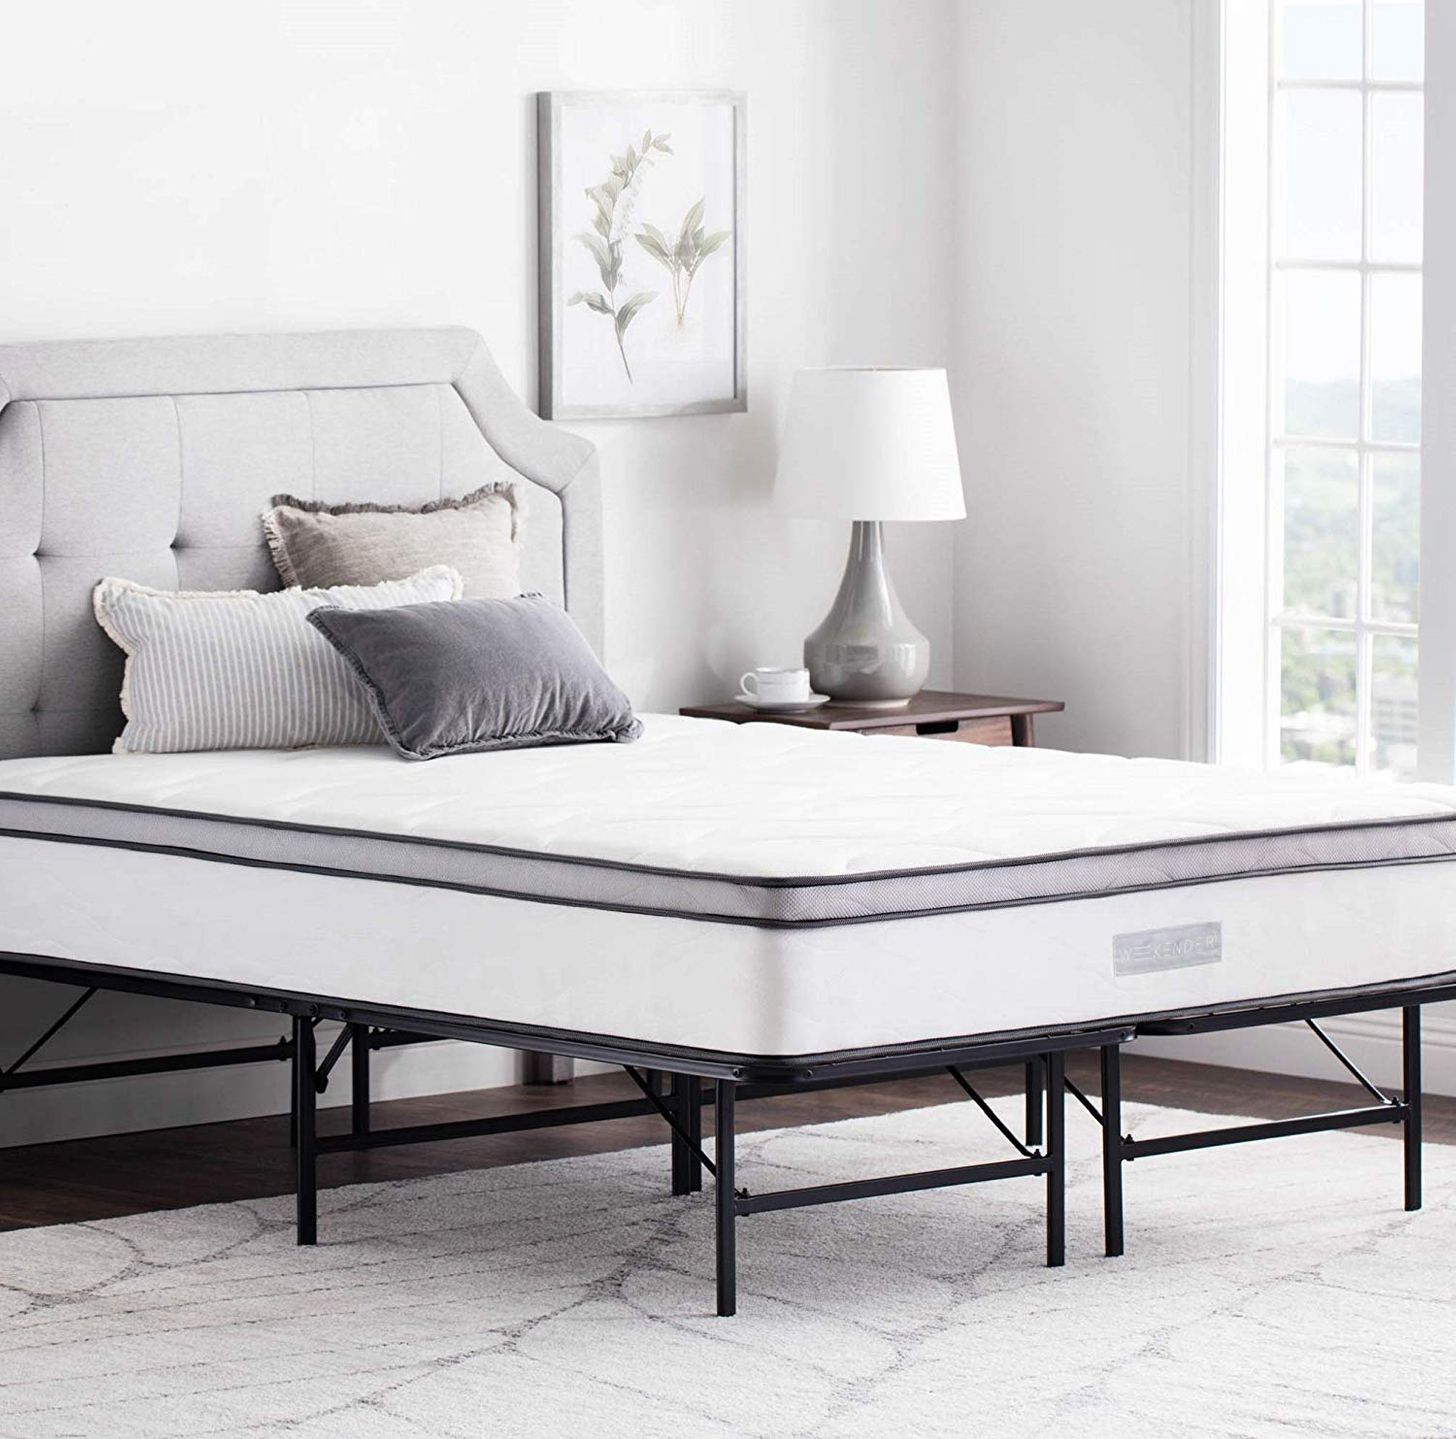 19 Best Metal Bed Frames 2020 The, Bed Frame For Boxspring And Mattress